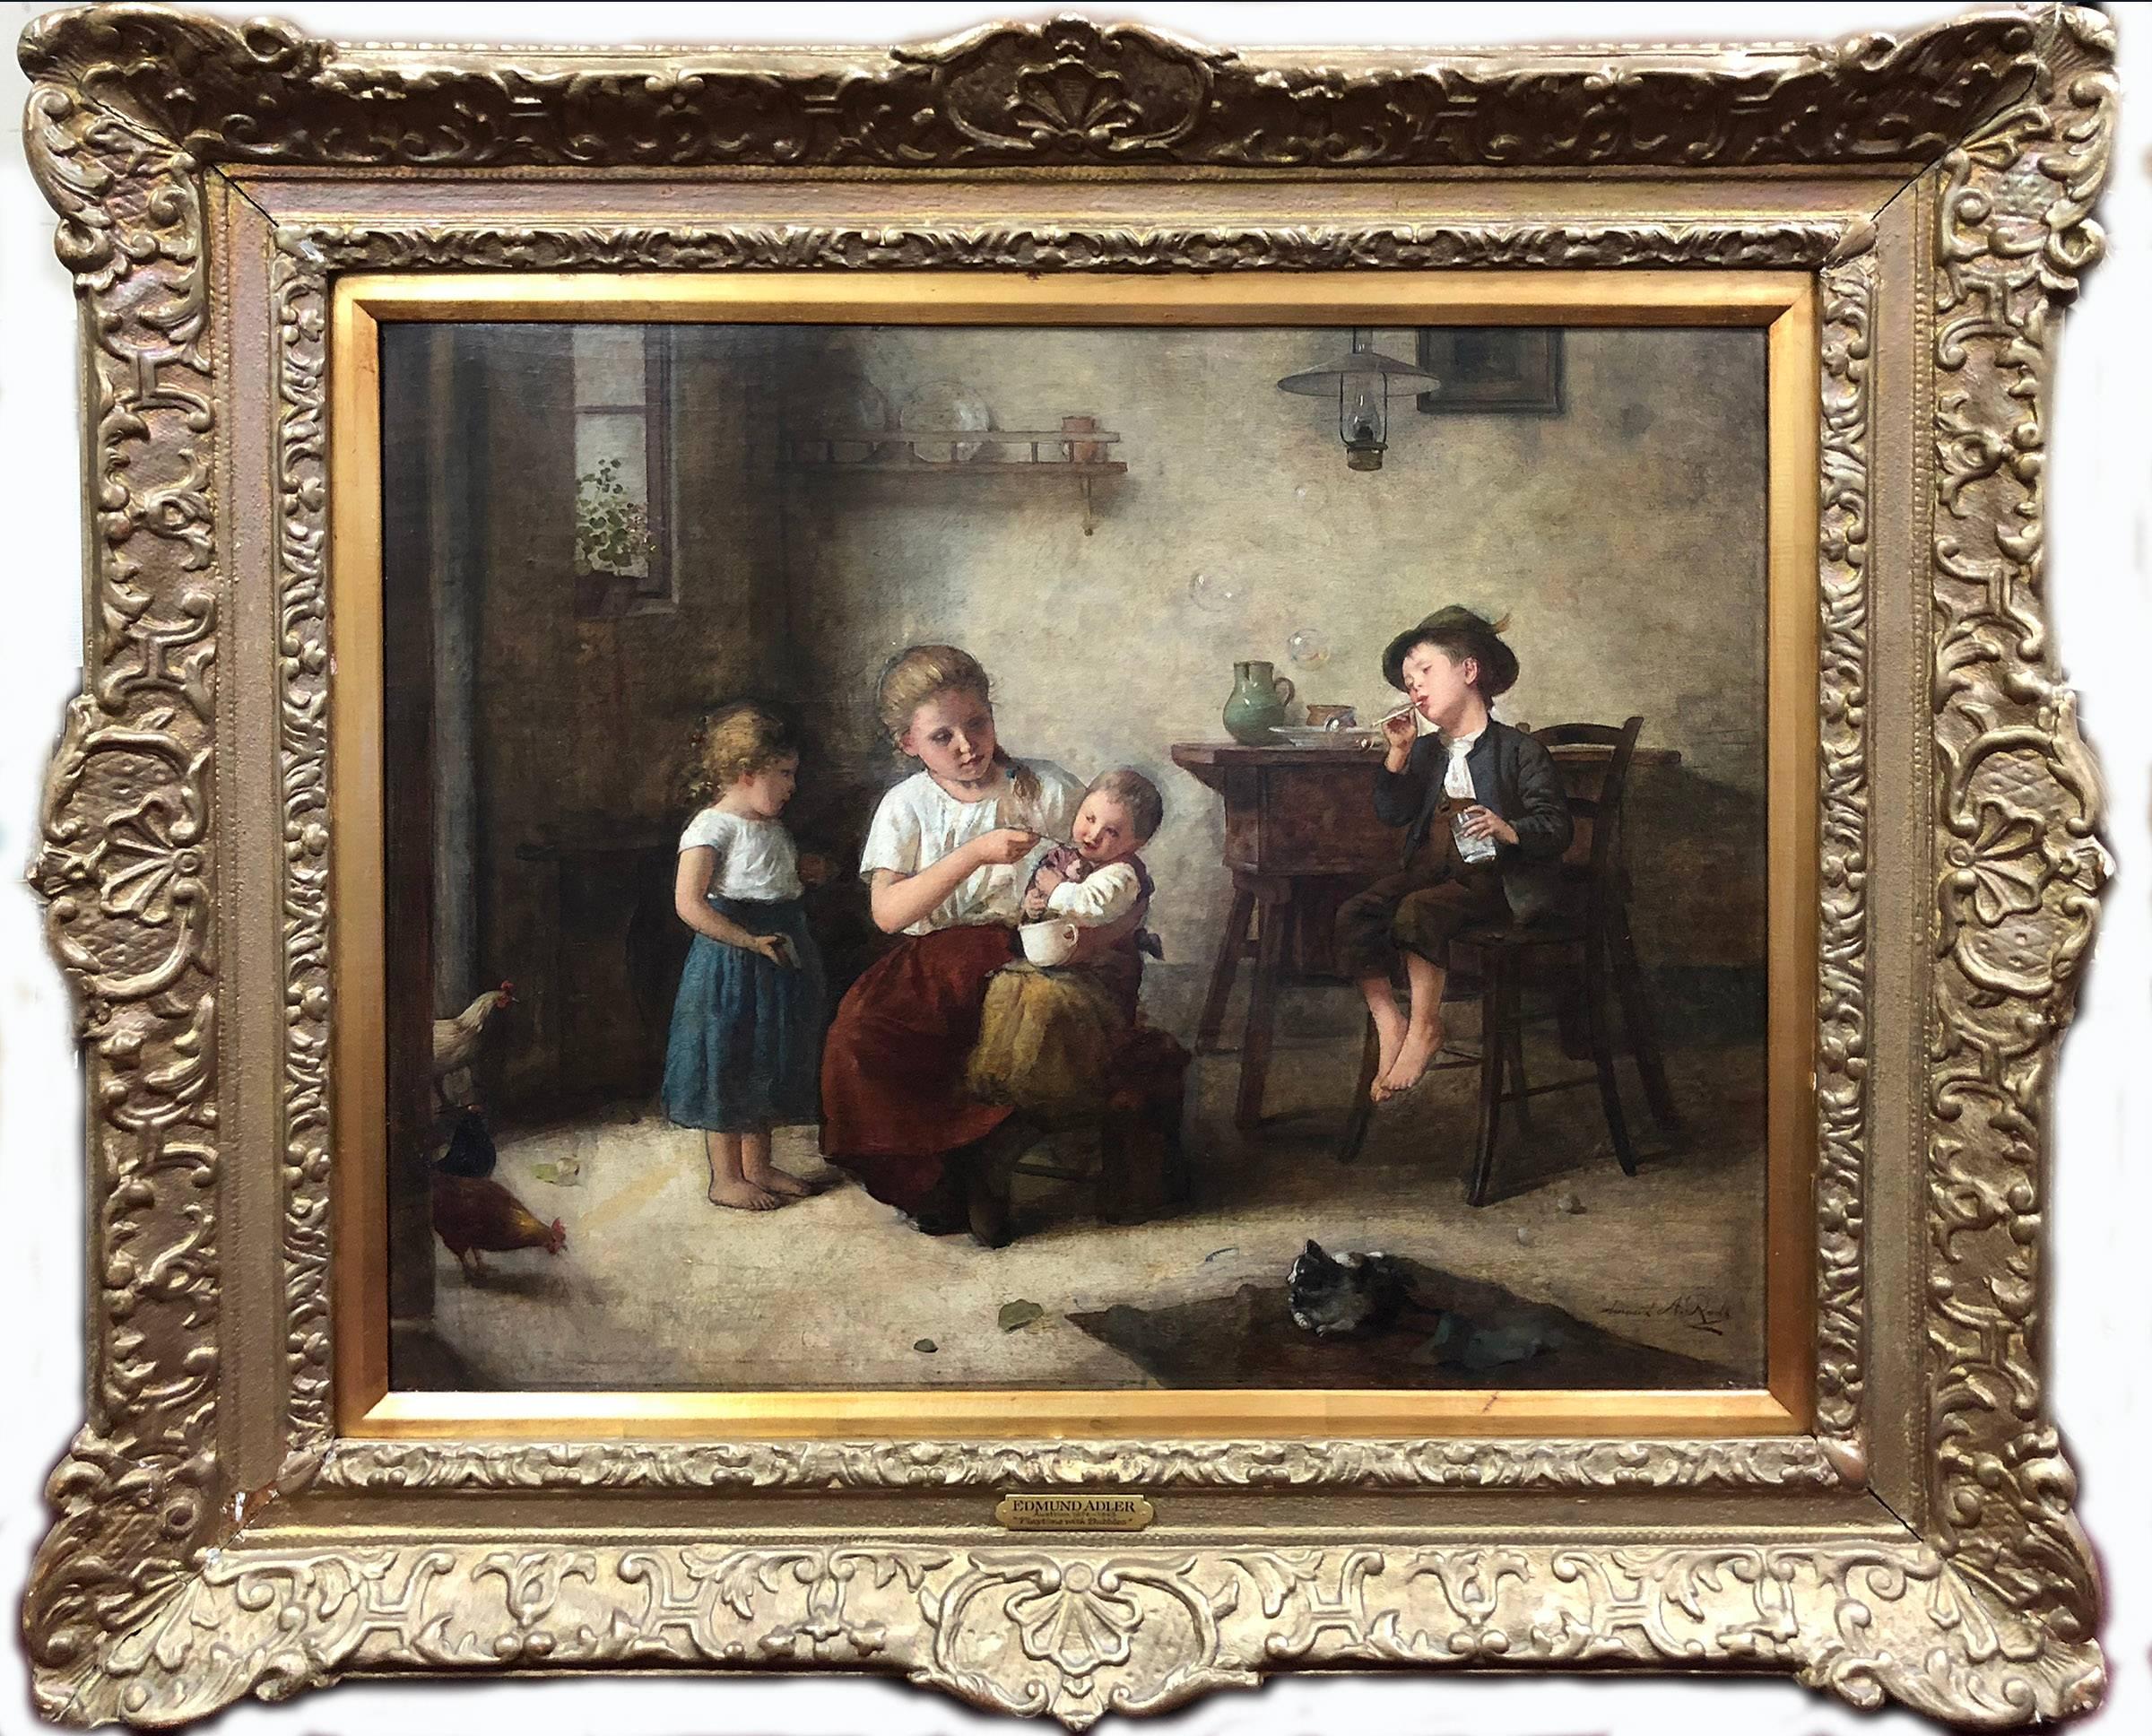 Blowing Bubbles - Painting by Edmund Adler